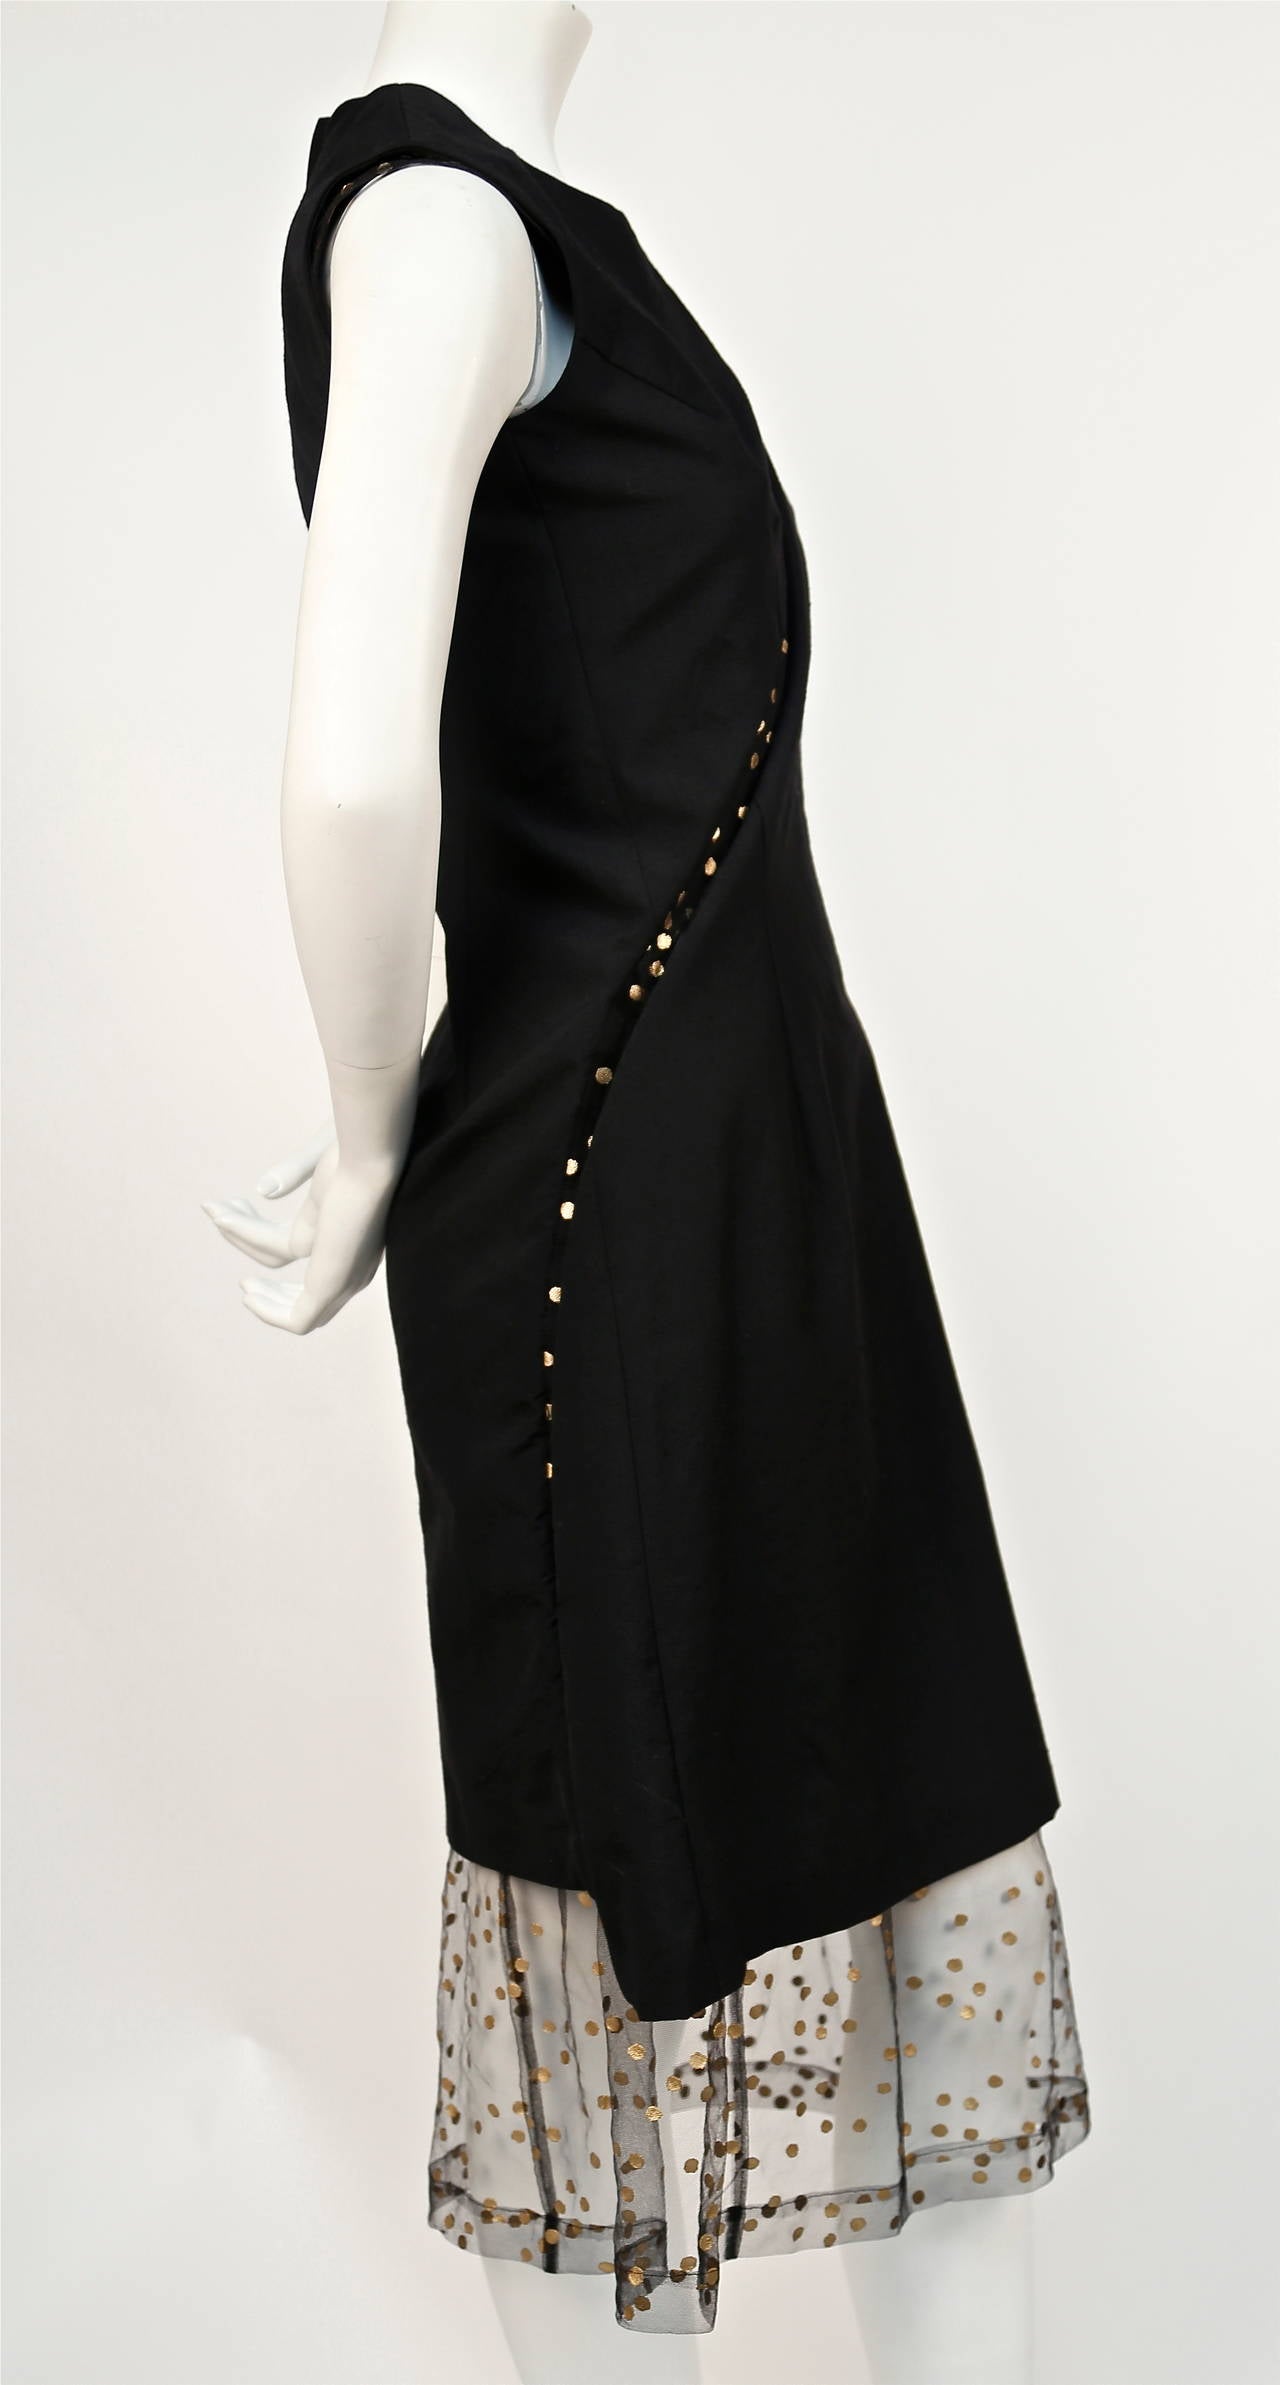 Very rare black dress with metallic gold dotted tulle from Comme Des Garcons dating to fall of 1997 as seen on the runway. Size 'S'. Approximate measurements: bust 33.5